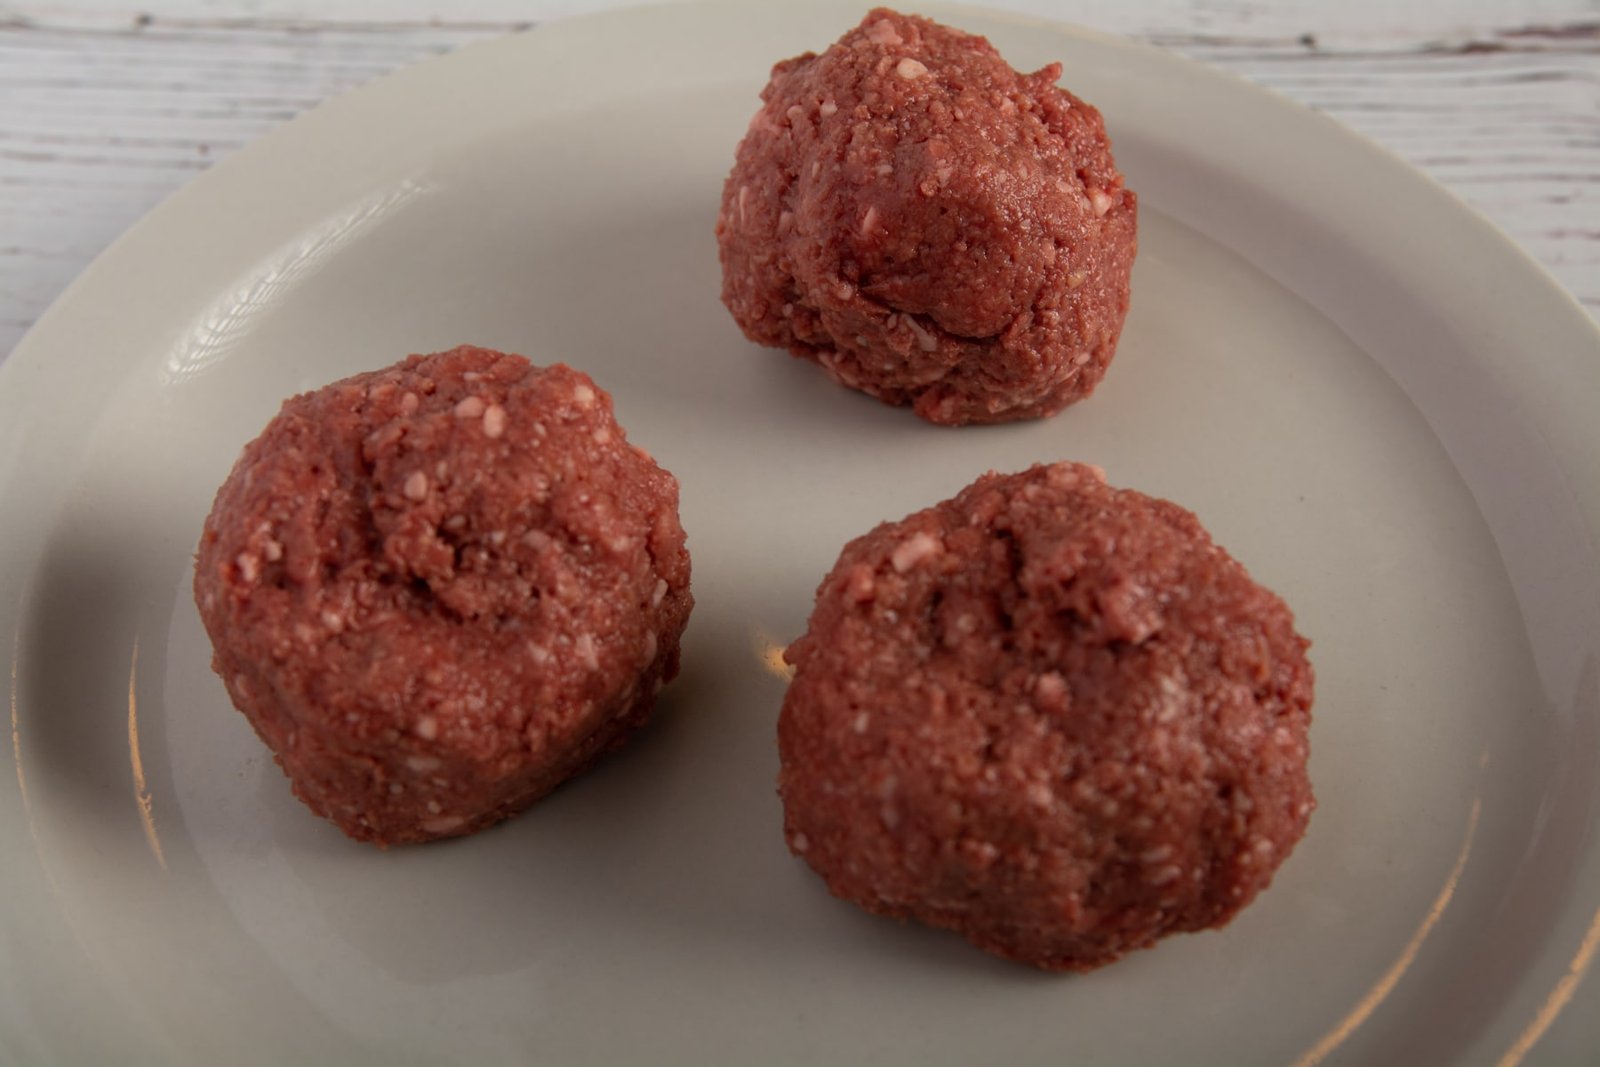 Three balls of vegan meat on a plate